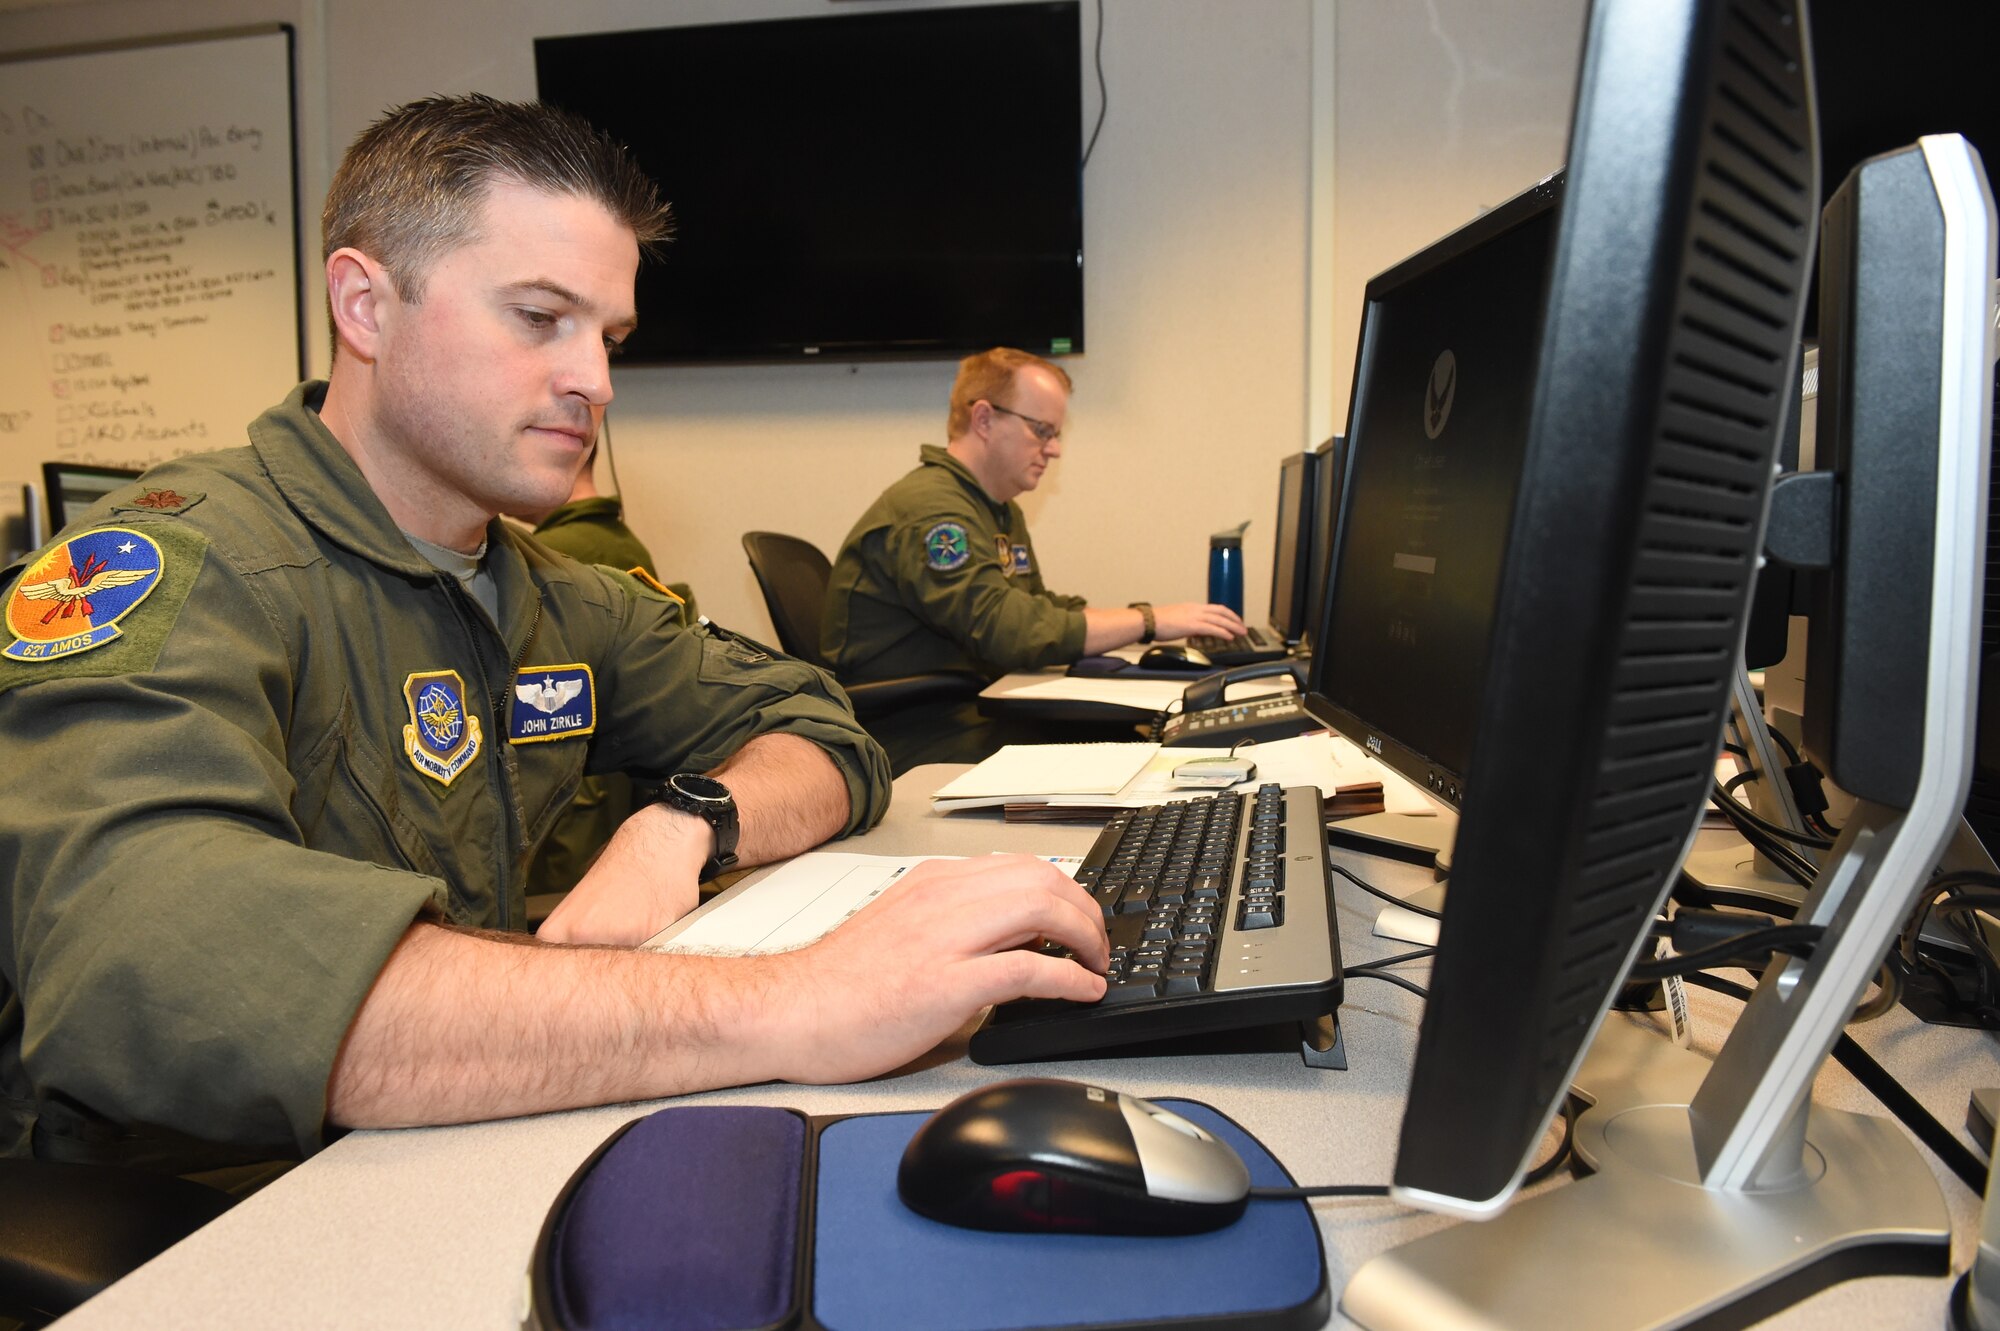 Two U.S. Air Force Airmen log into computers using keyboards inside an Air Operations Weapon System Suite at Joint Base McGuire-Dix-Lakehurst, October 12.